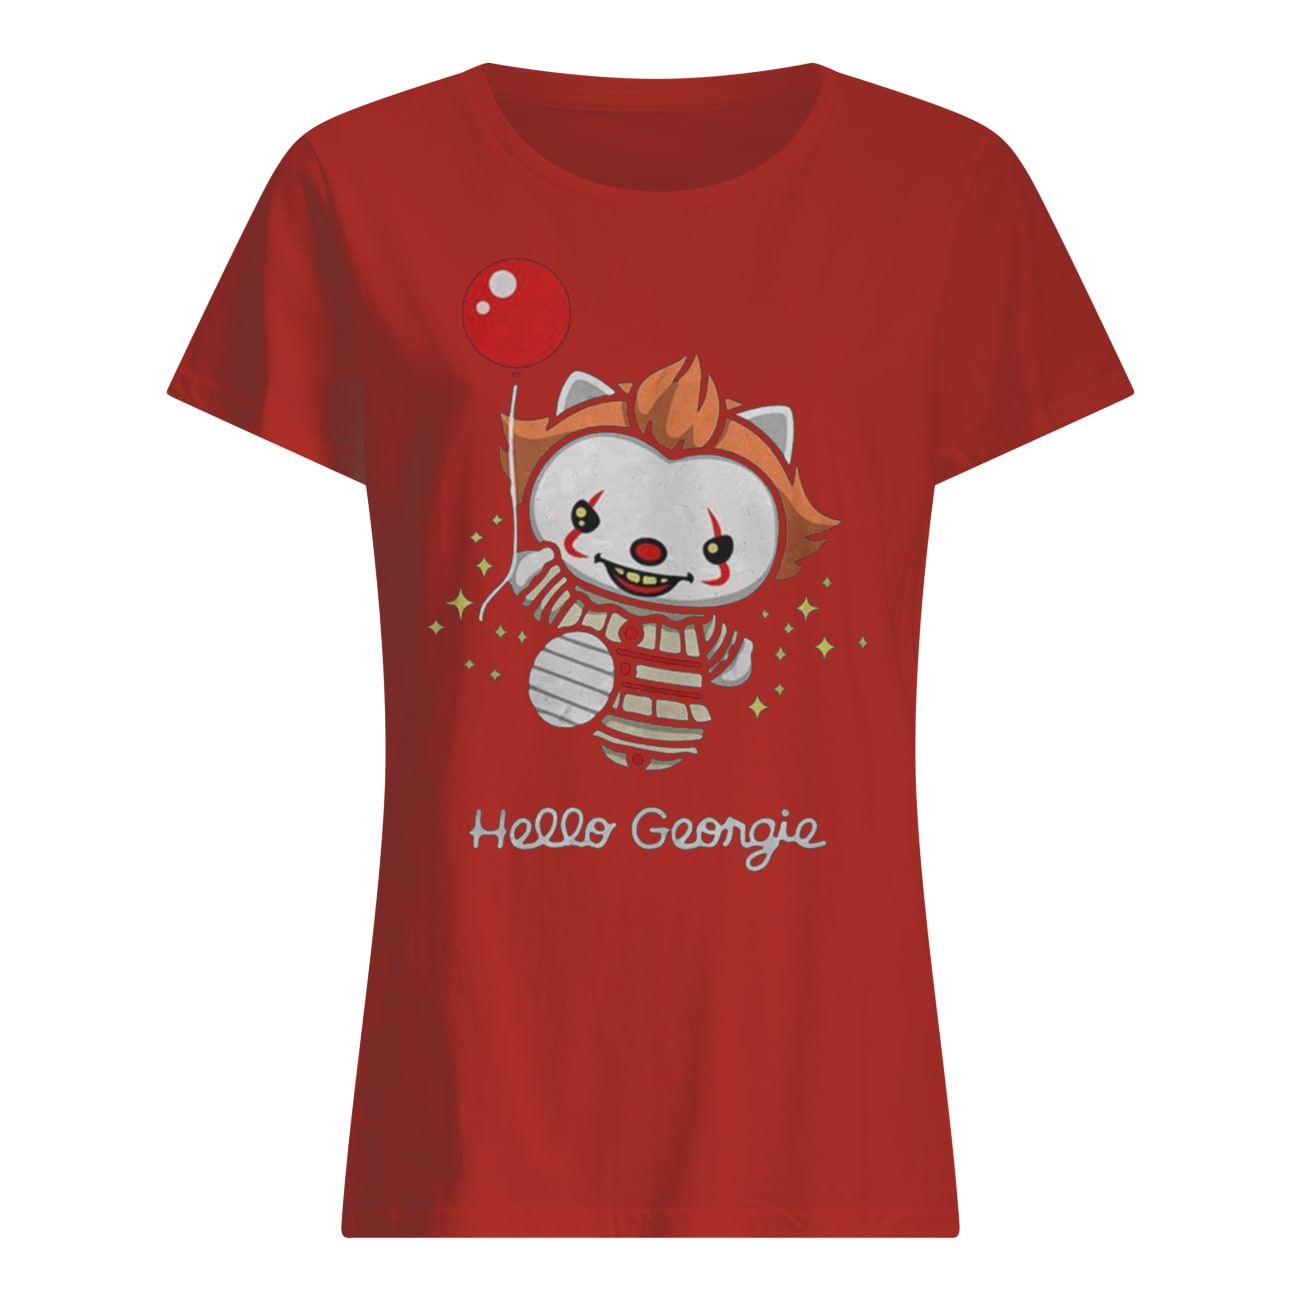 Pennywise kitty cat hello georgie womens shirt